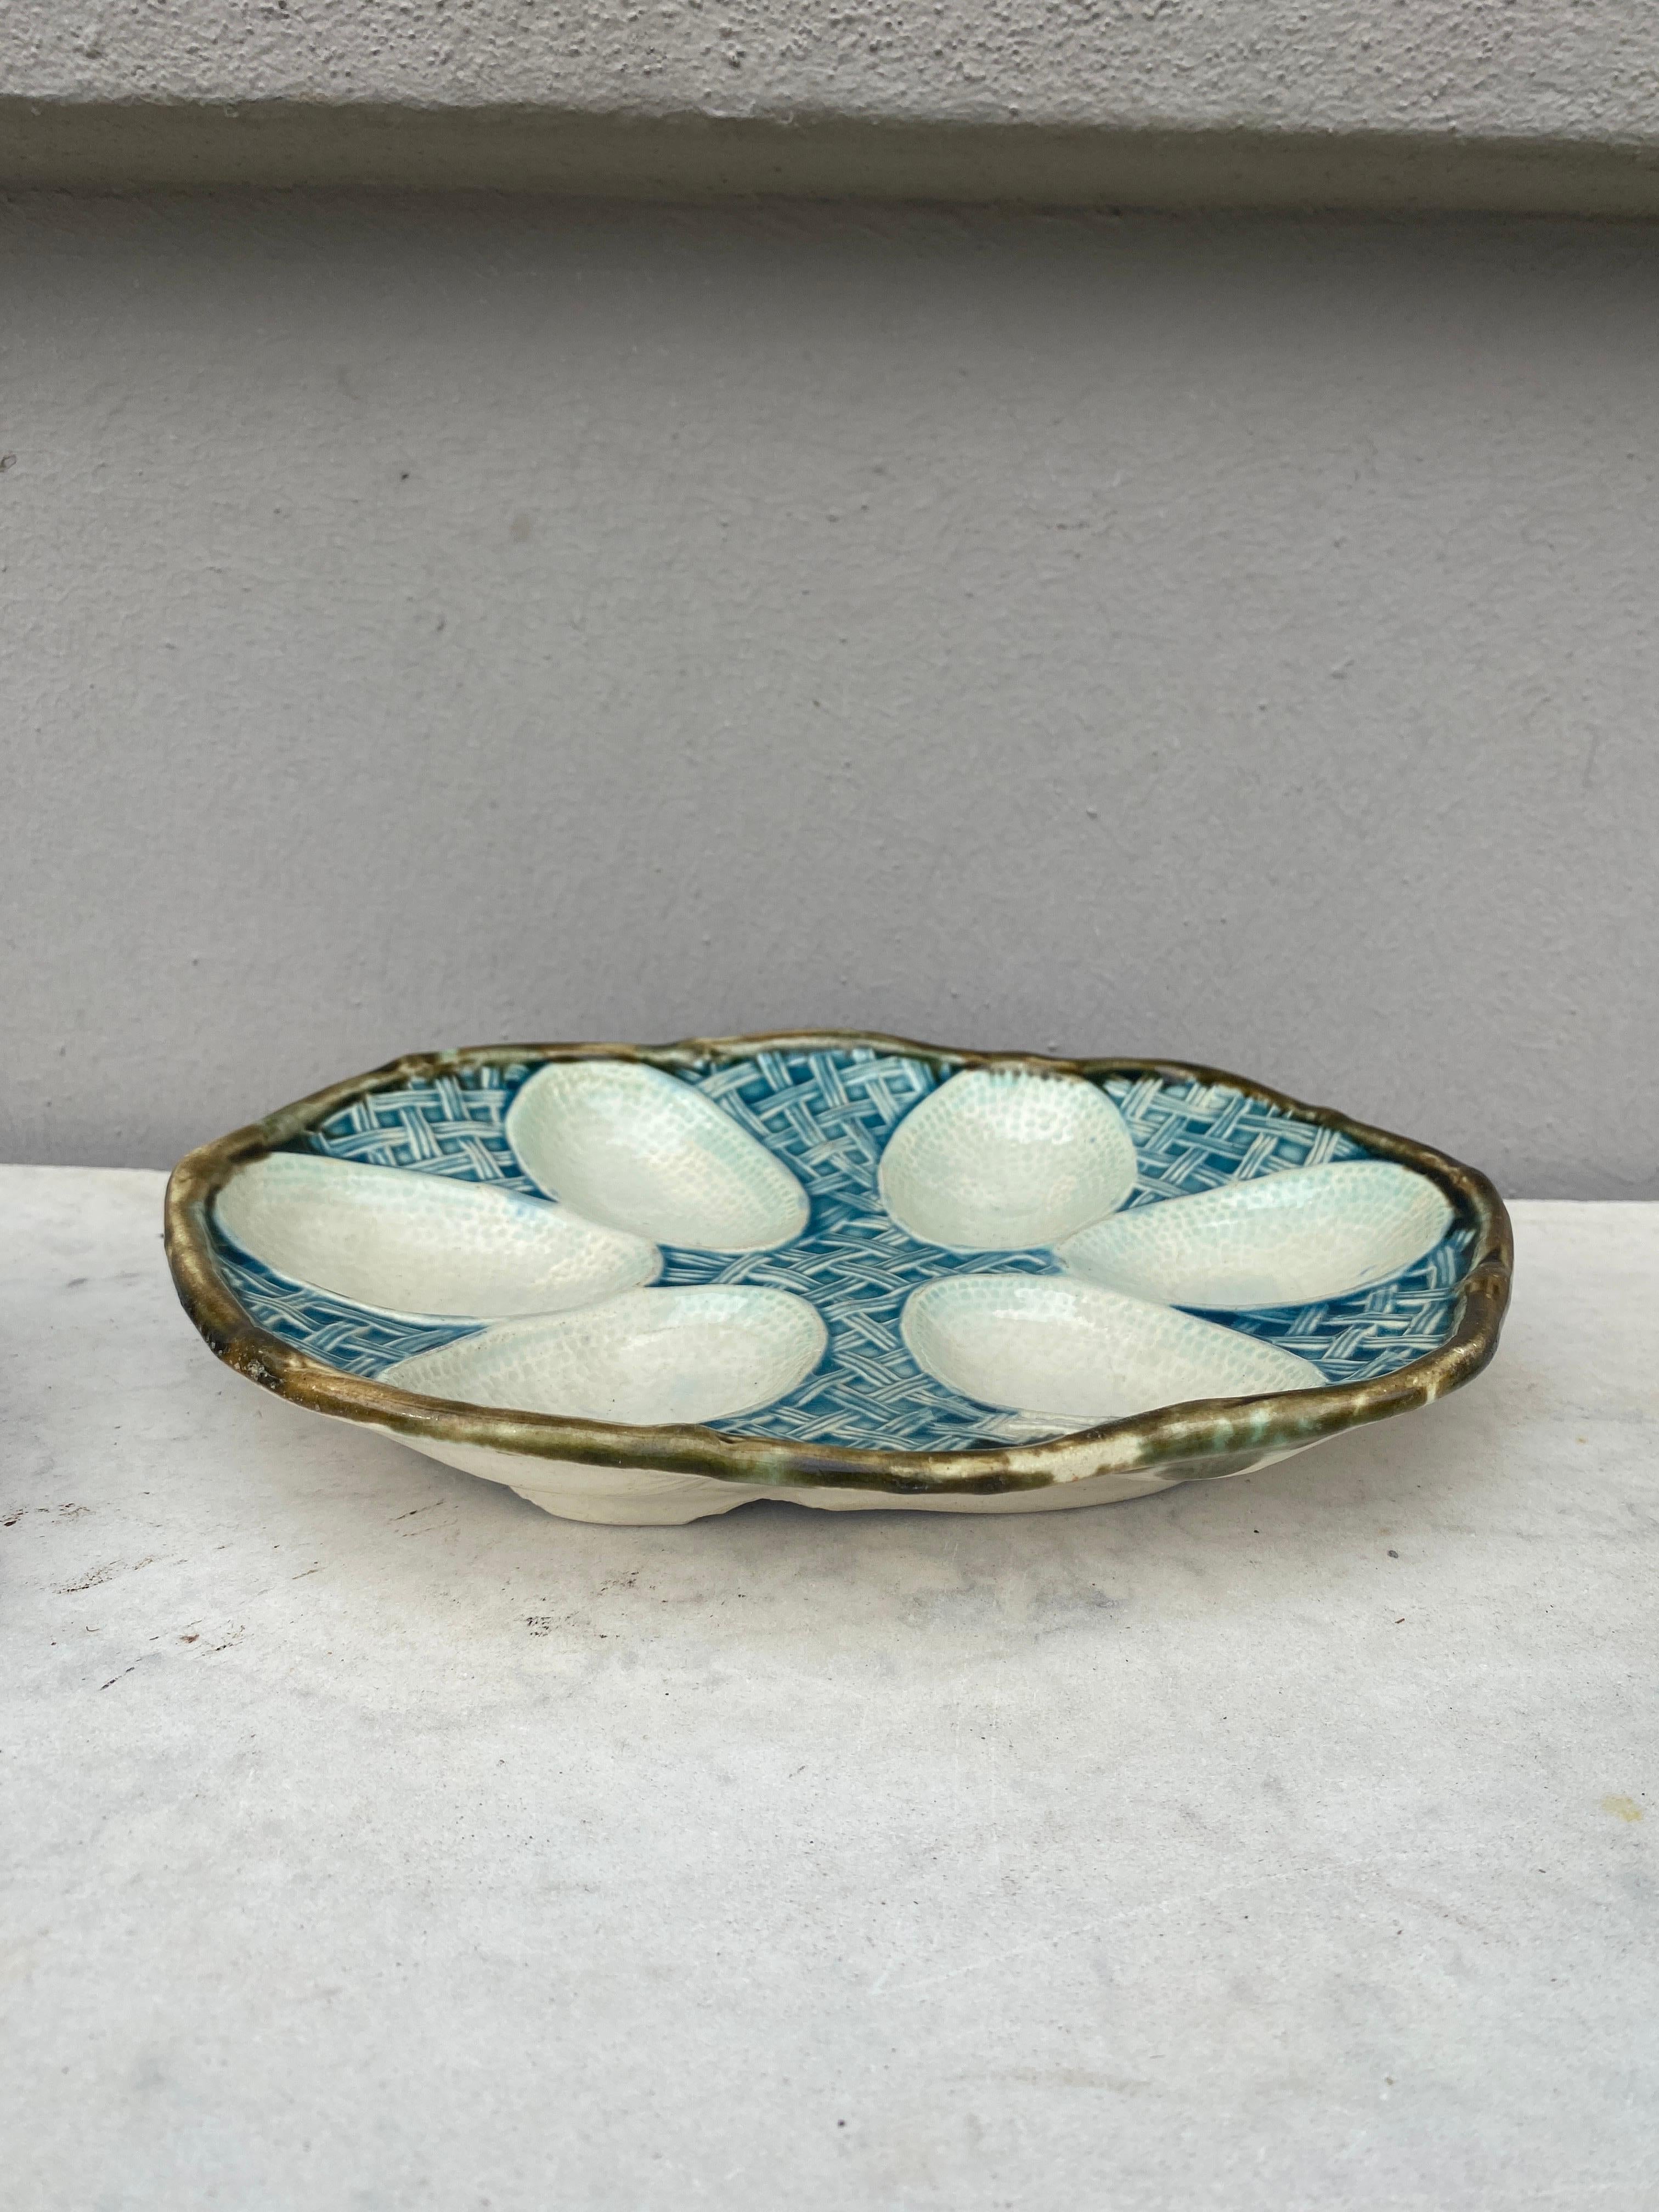 Antique French Majolica oval egg plate circa 1890.
6 eggs on a baby blue basketweave background.
Chips on the back of the plate.